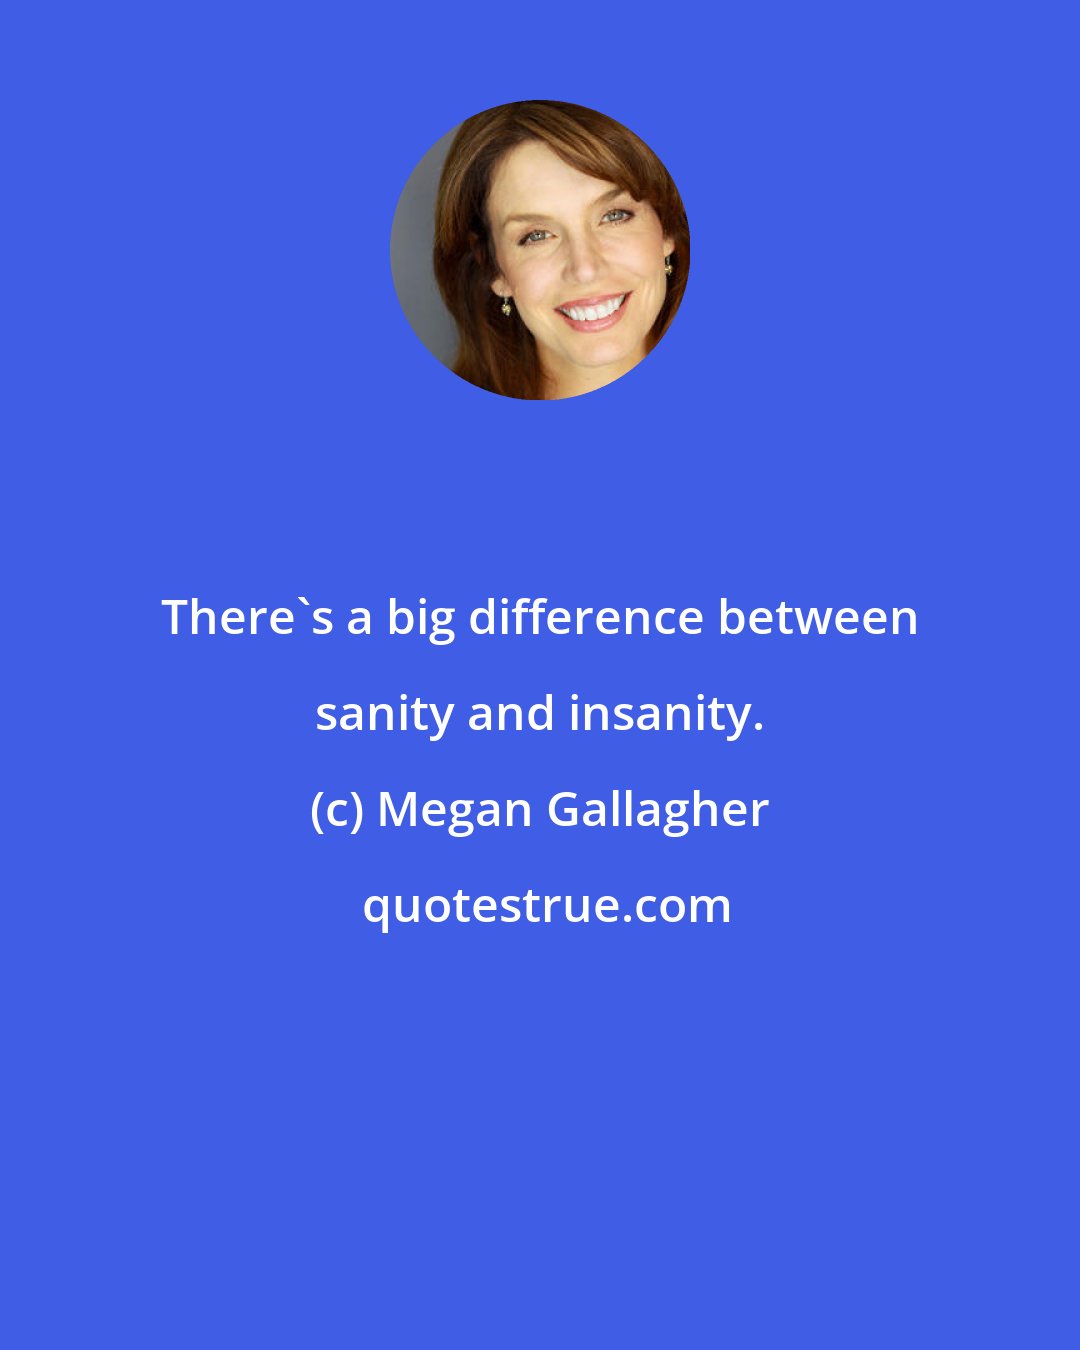 Megan Gallagher: There's a big difference between sanity and insanity.